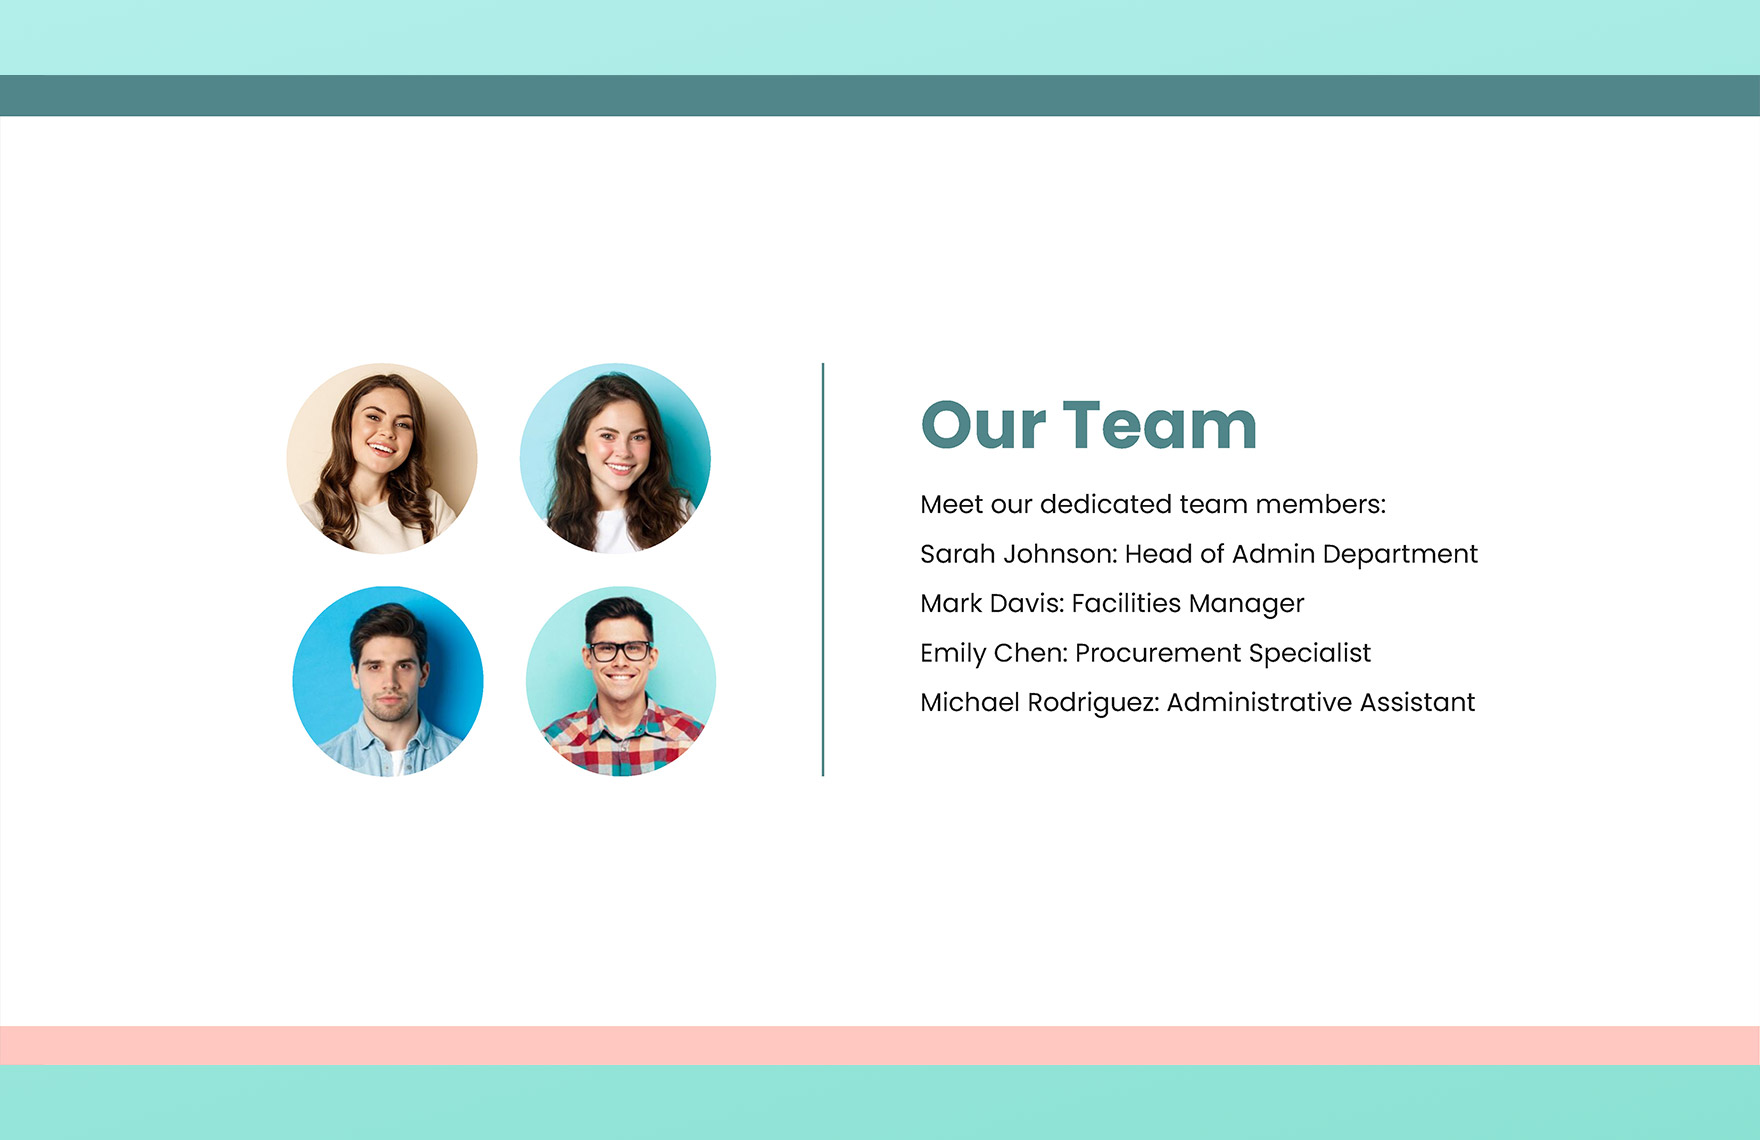 PPT for Admin Department Template